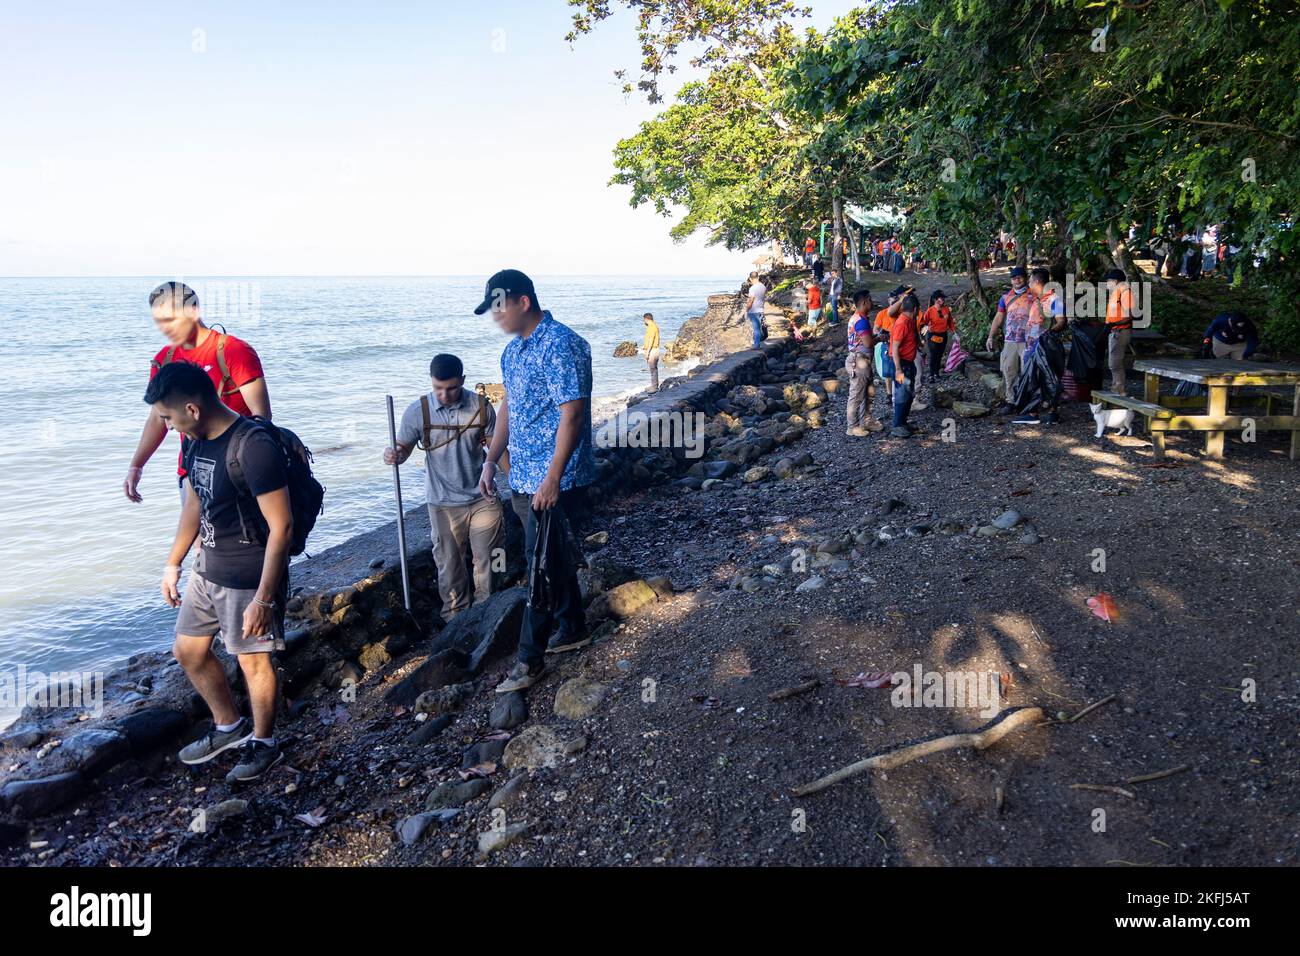 Members of the Philippine Coast Guard (PCG) and U.S. Special Operations Task Force (SOTF) 511.2 participate in a coastal cleanup during International Coastal Cleanup Day in Zamboanga, Philippines, Sept. 17, 2022. SOTF 511.2 regularly conducts humanitarian and civic assistance activities to provide direct support to the local community while also forging greater relationships with partners from the PCG, Armed Forces of the Philippines, and various local organizations. Stock Photo